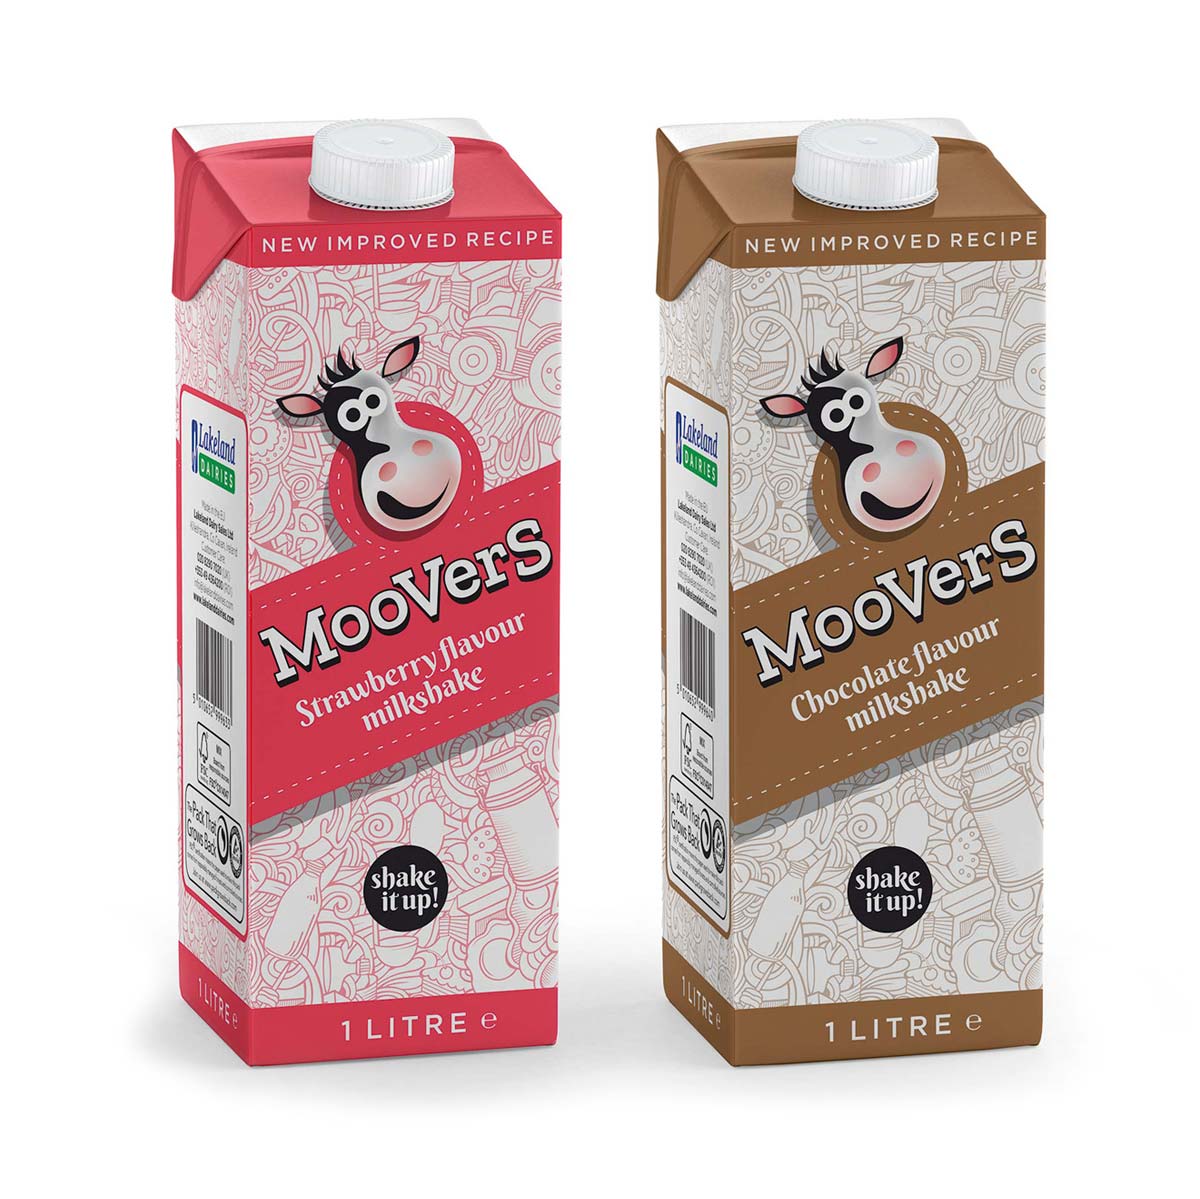 Moovers flavoured milk character and pack design